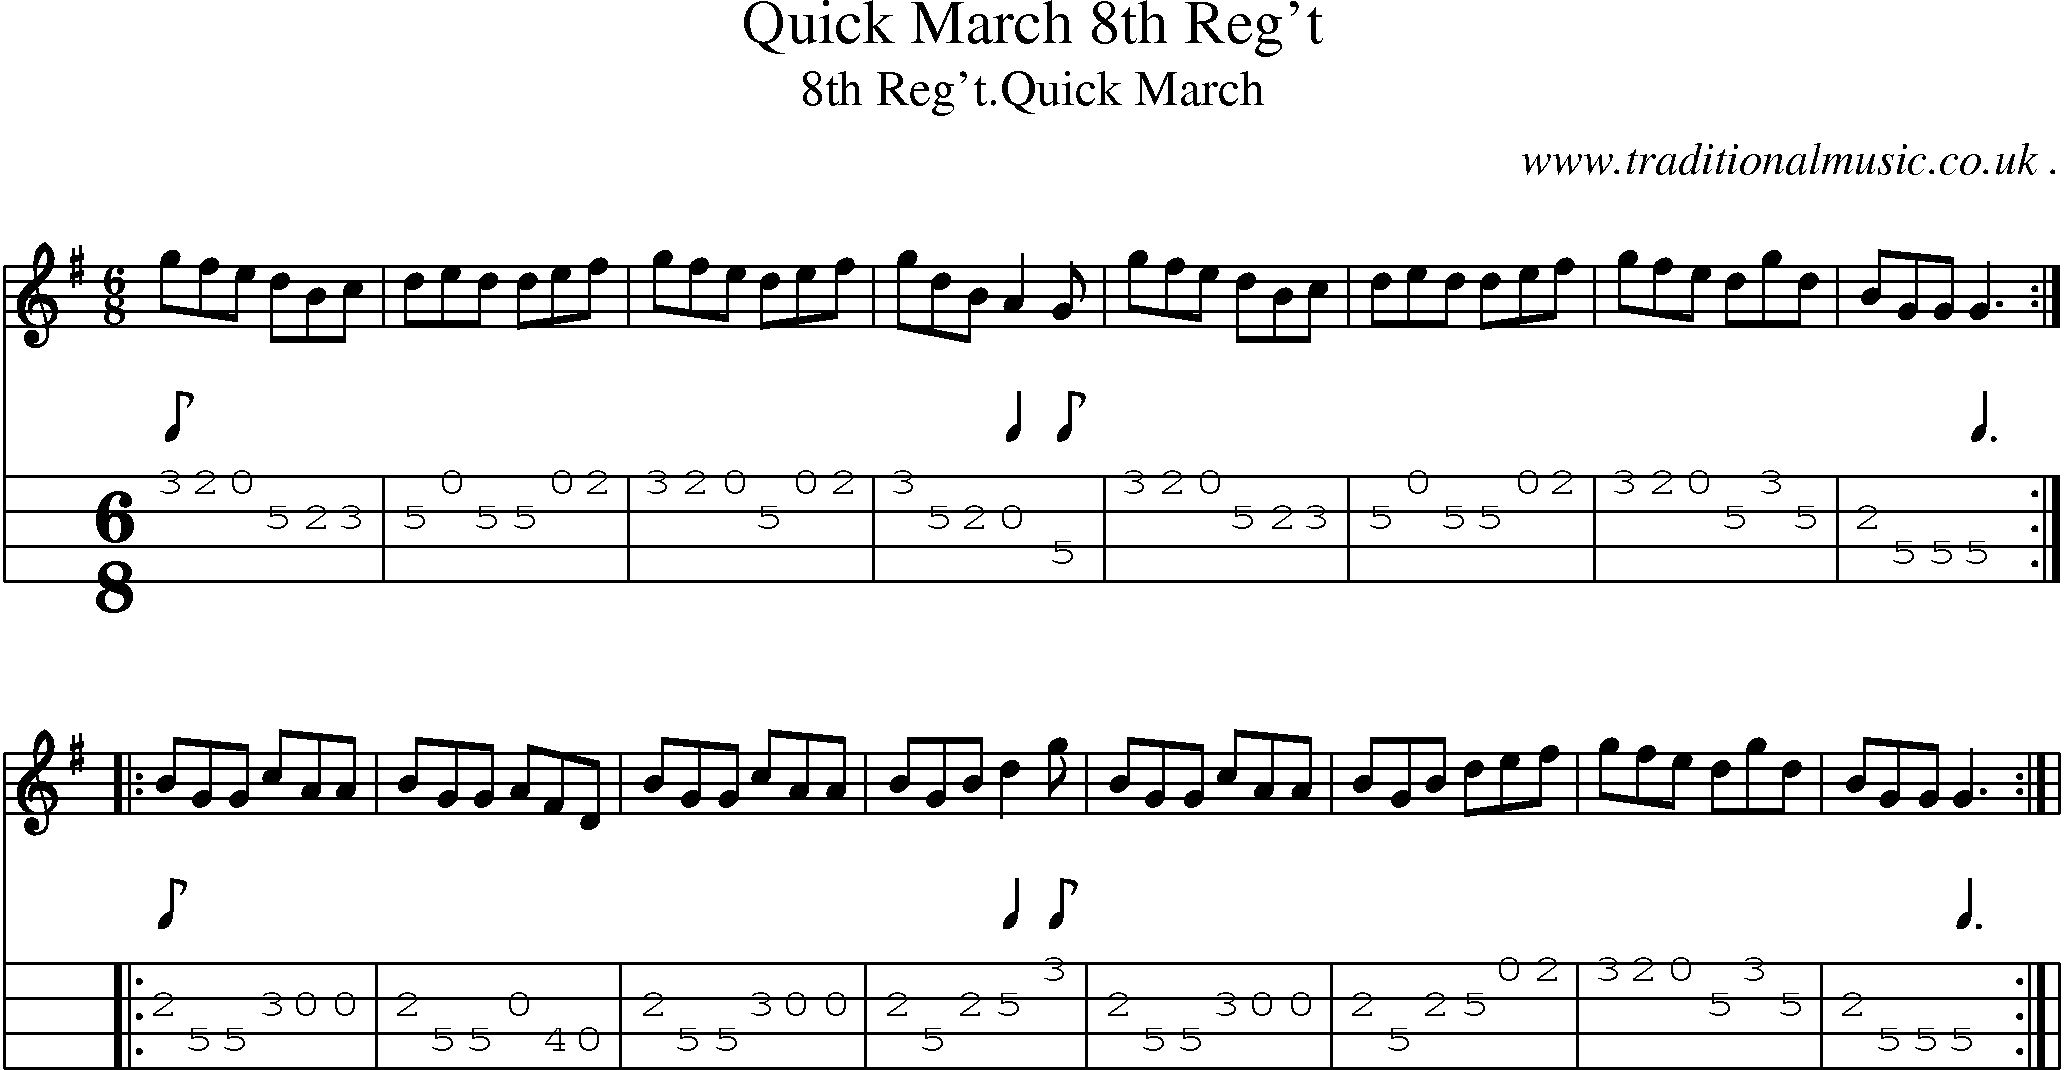 Sheet-Music and Mandolin Tabs for Quick March 8th Reg